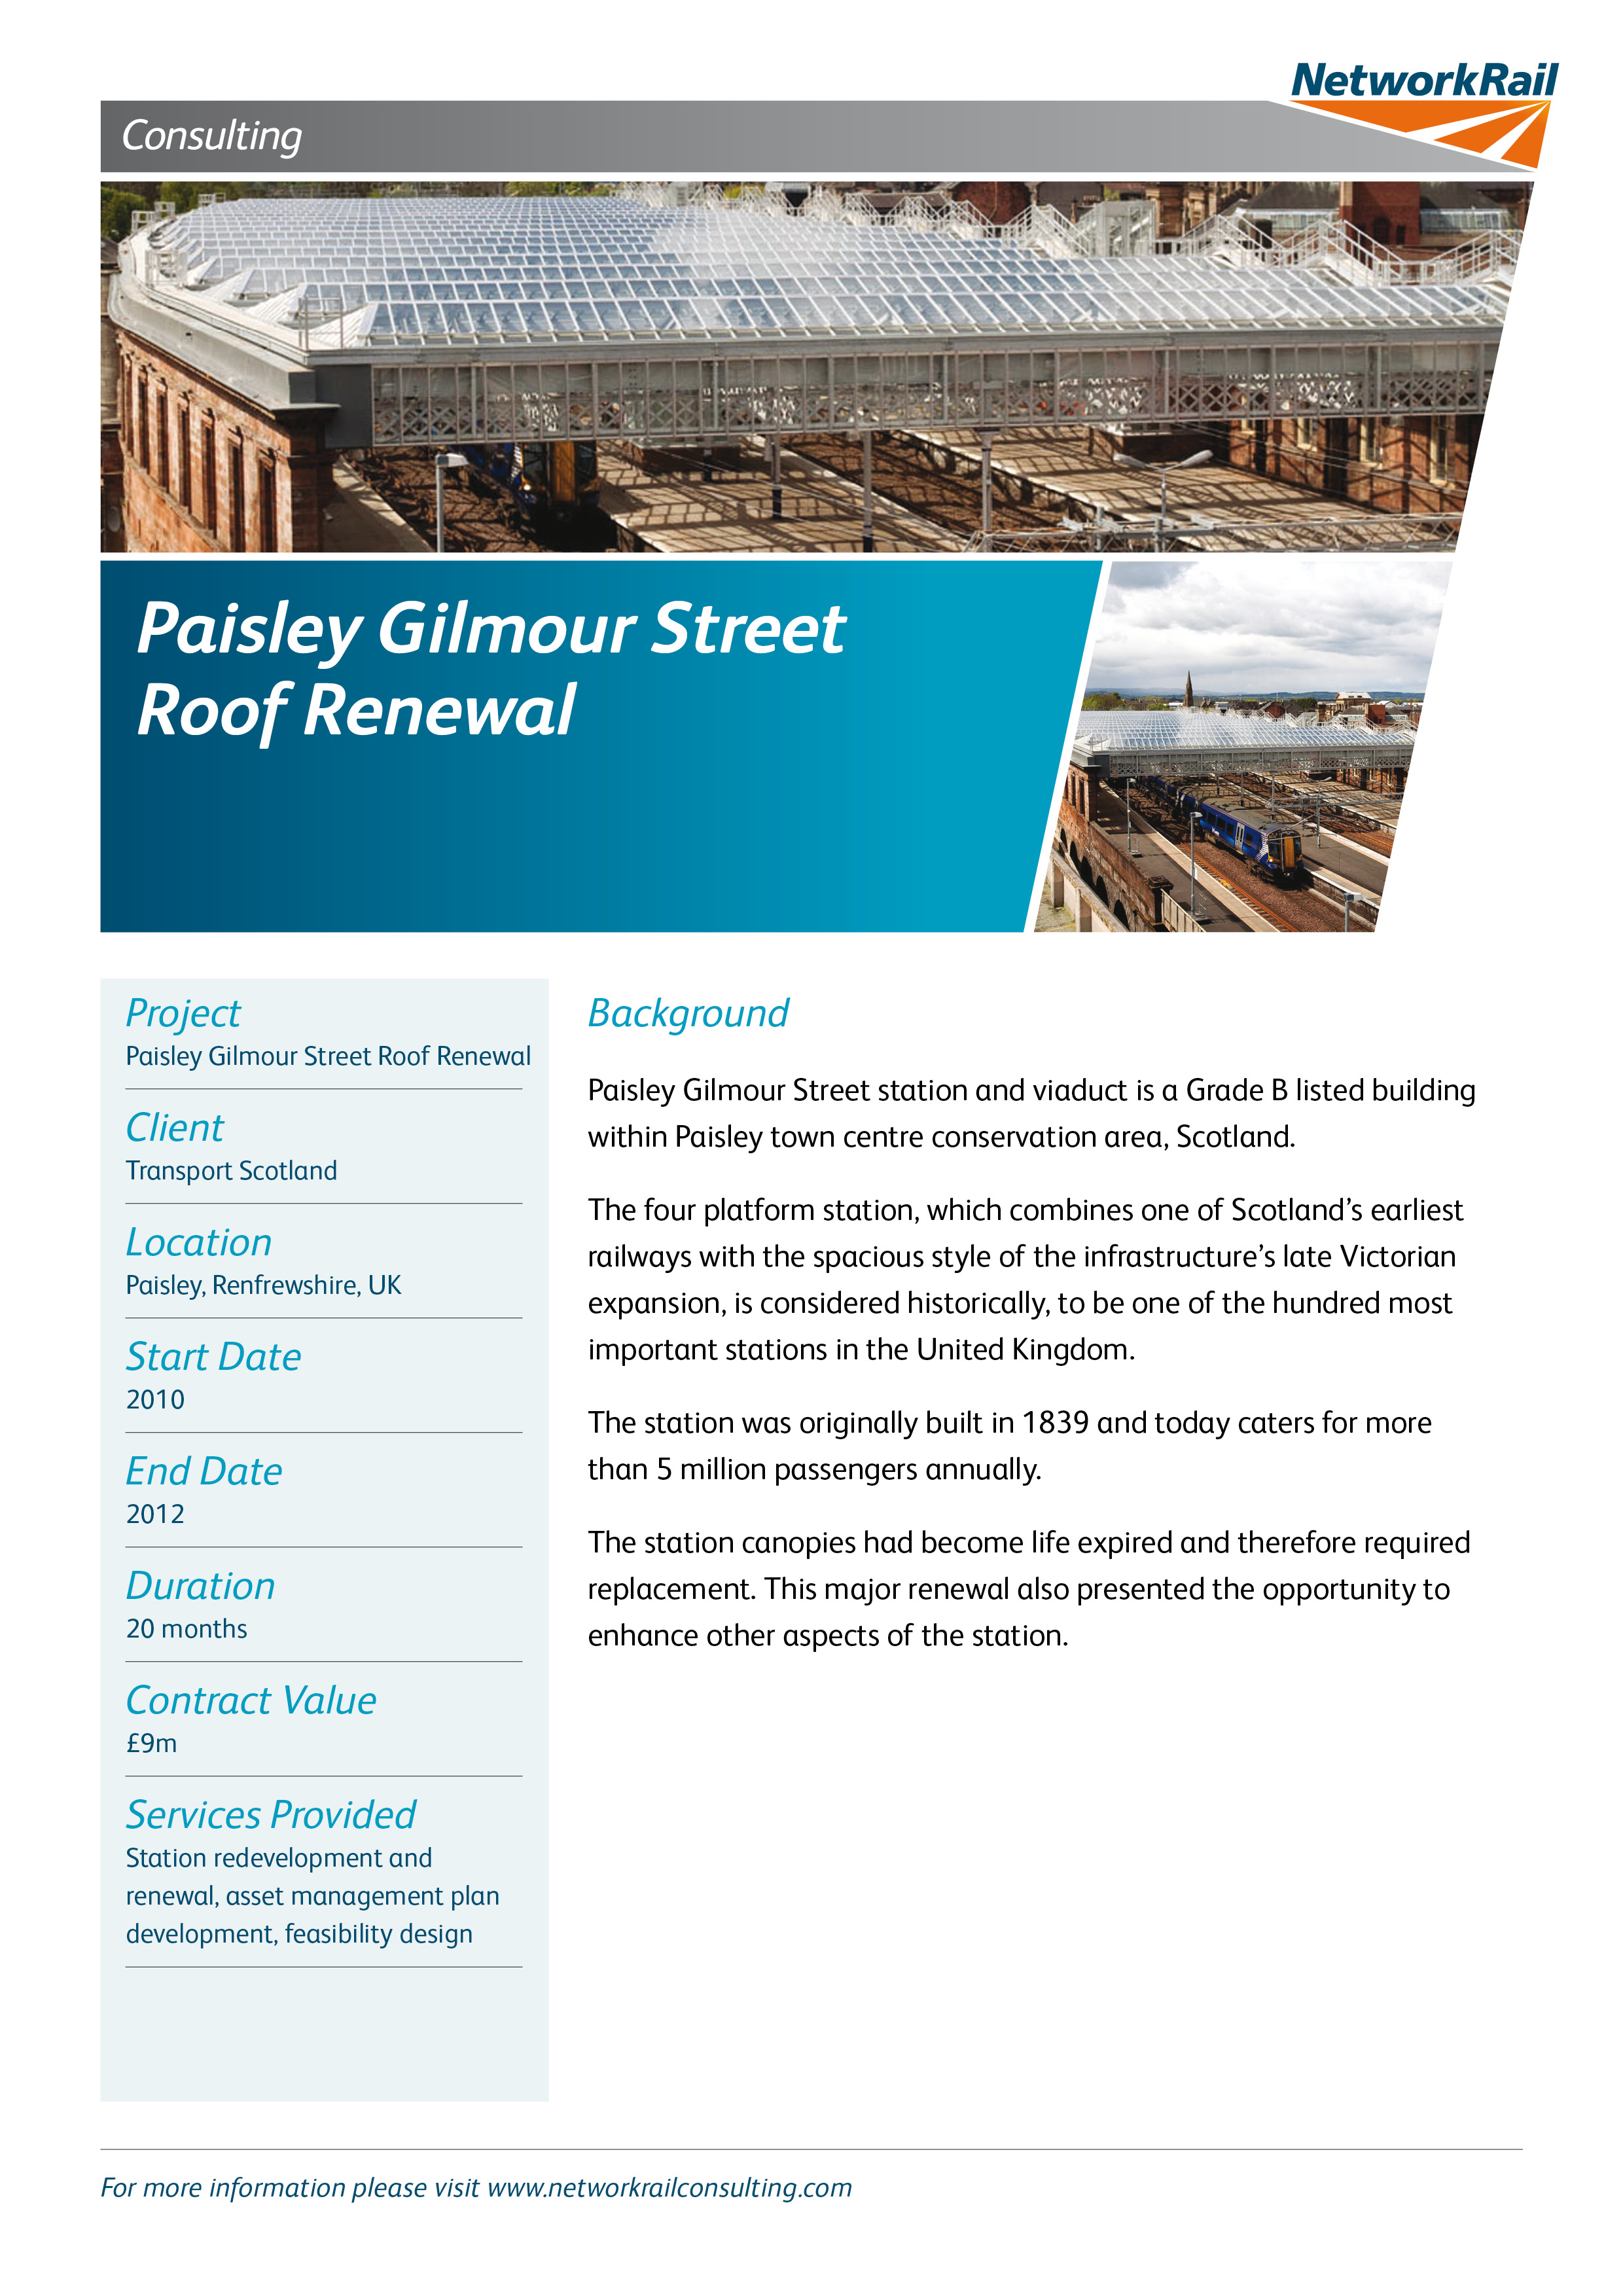 Paisley Gilmour Street Roof Renewal